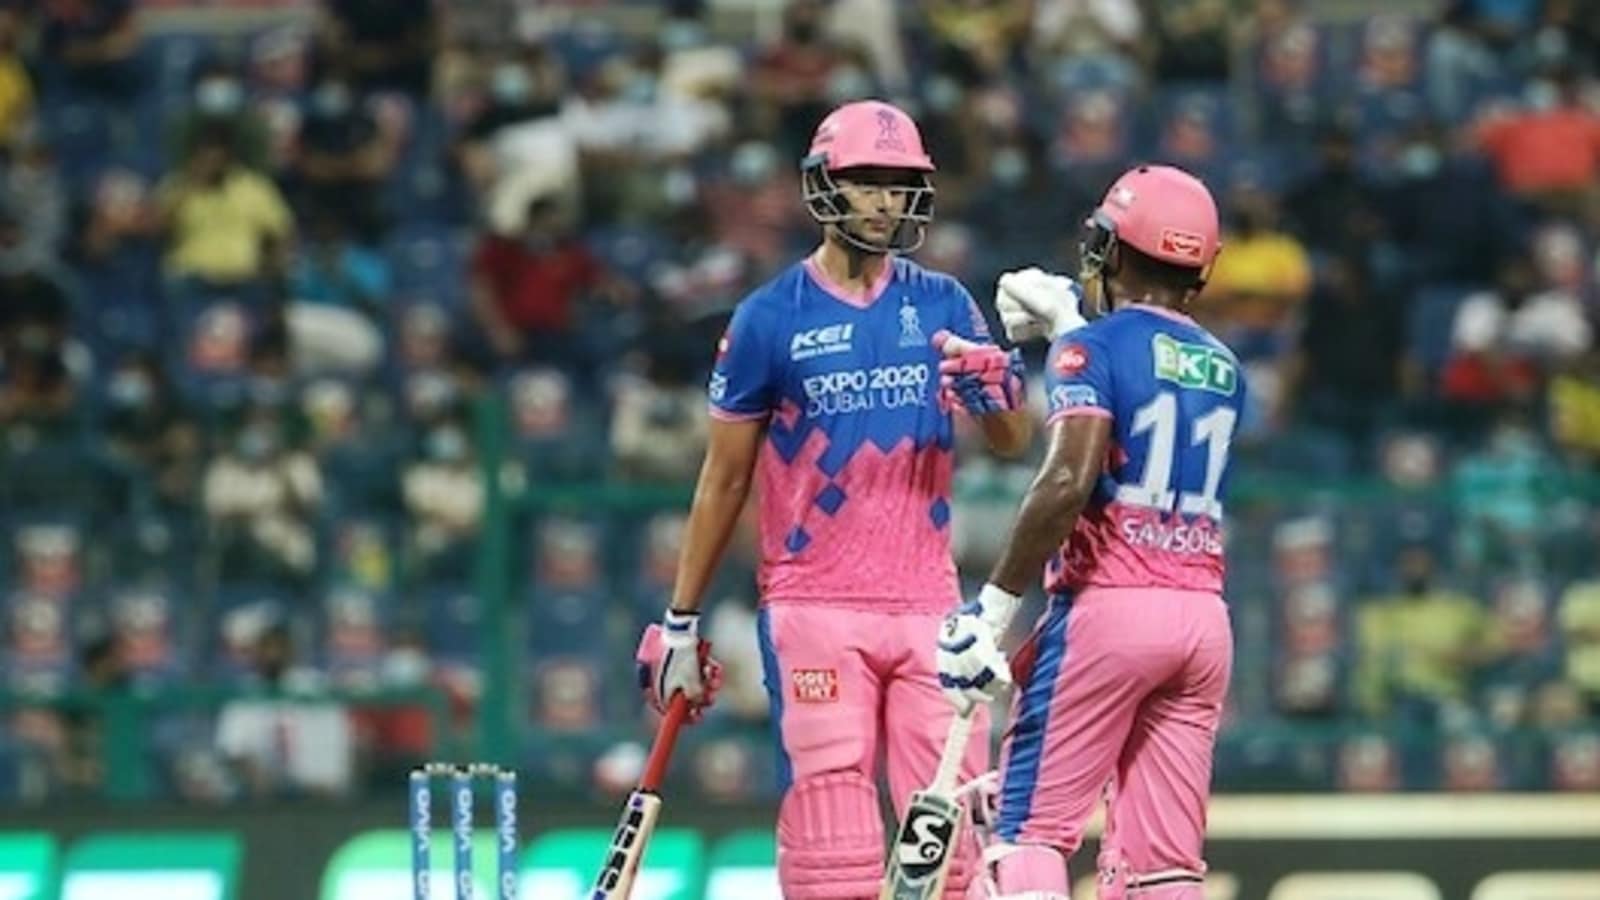 RR vs CSK highlights, IPL 2021 Dube, Jaiswal hit blazing fifties, RR beat CSK by 7 wickets to stay alive Hindustan Times